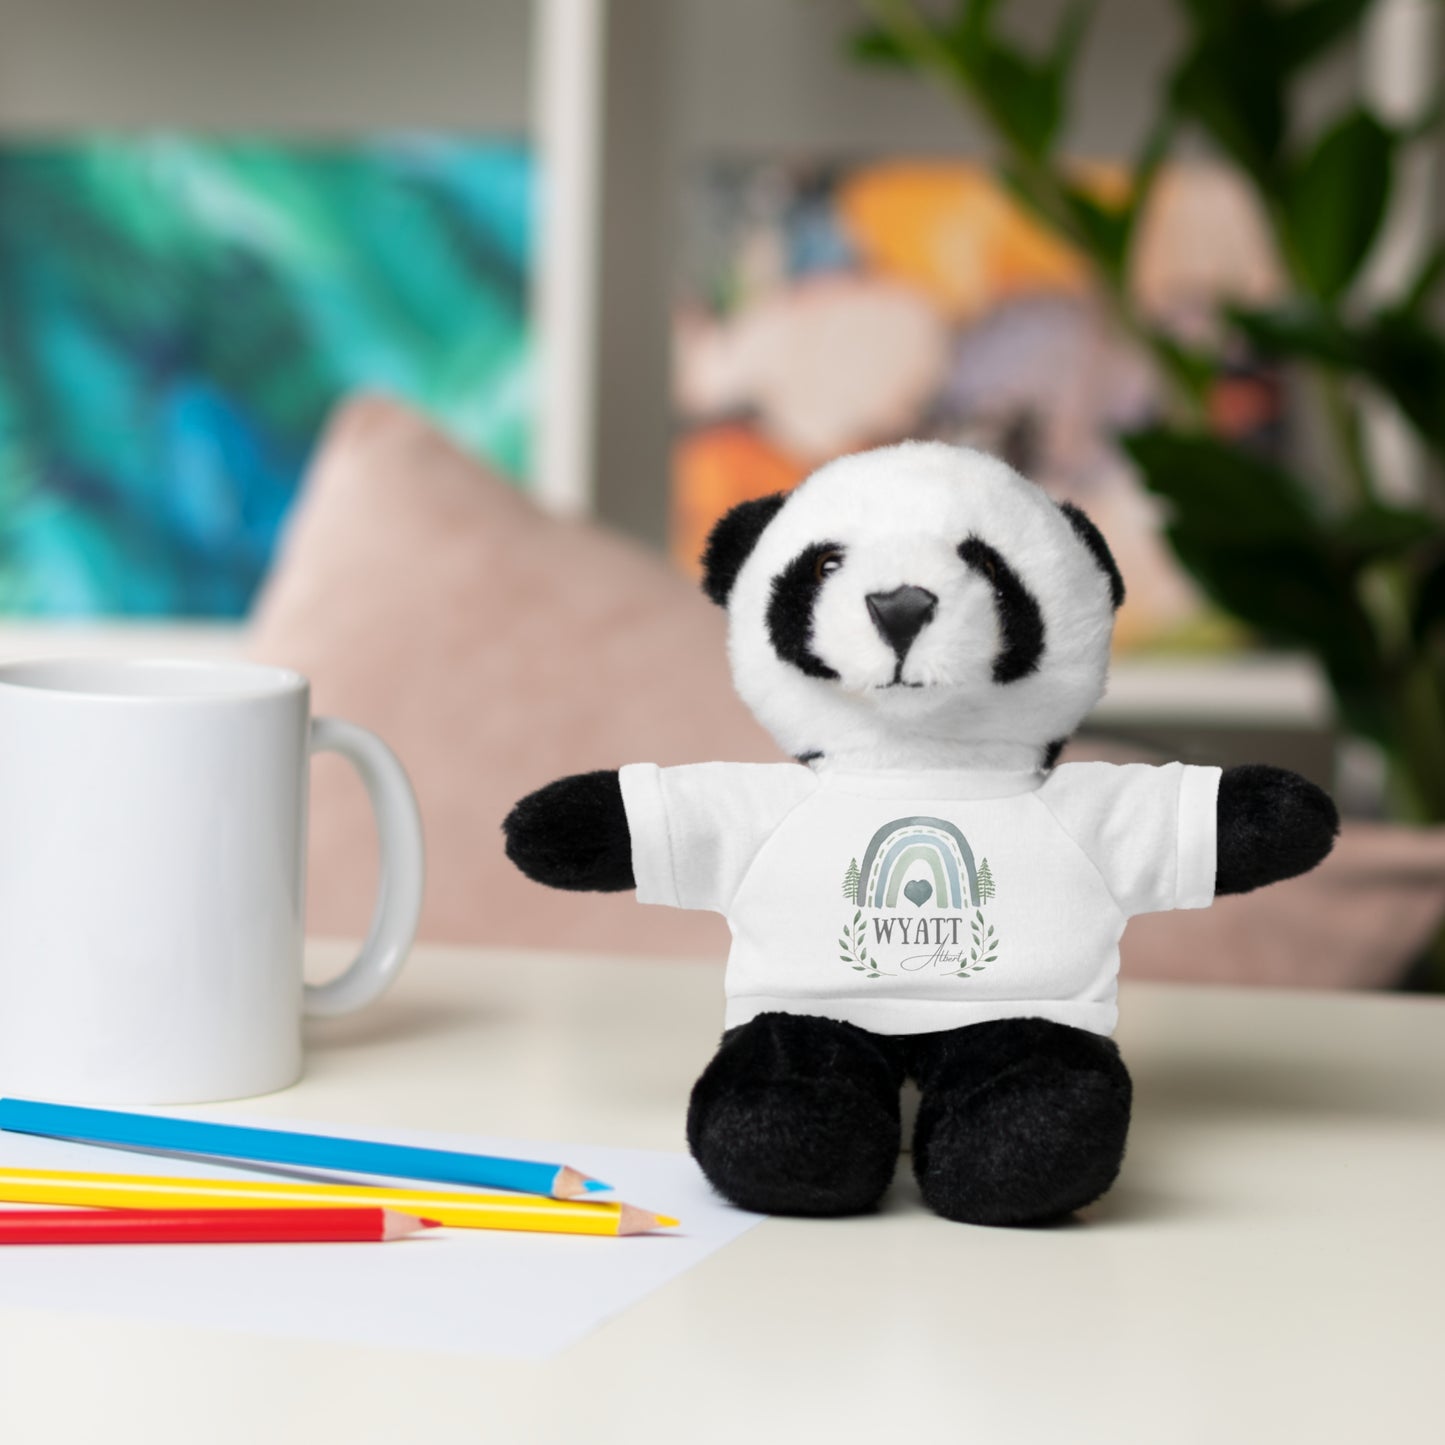 Personalized Name | Stuffed Animals with Customized Tee